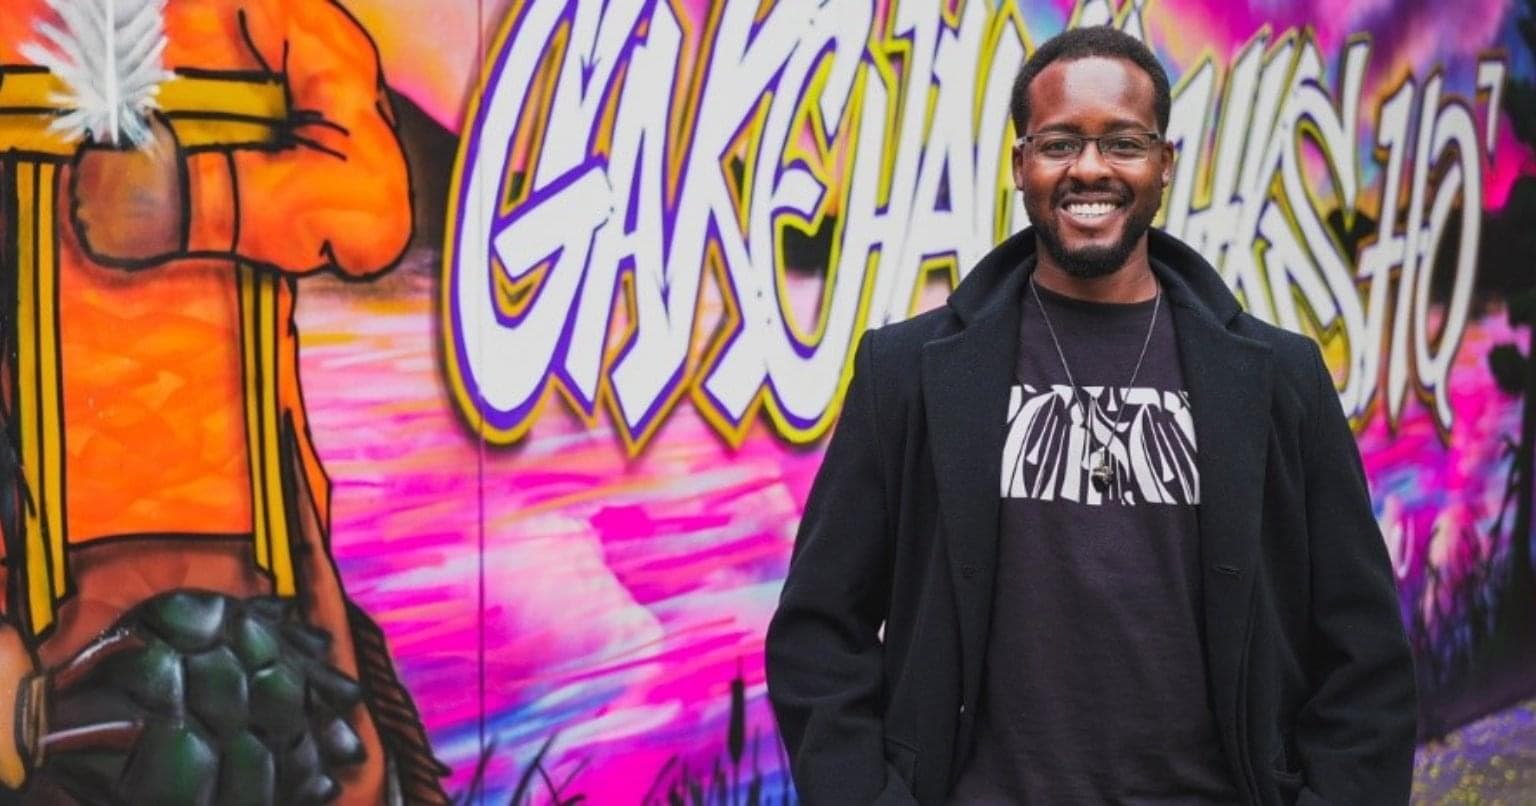 Black Toronto Artist Jessey Pacho standing in front of the colourful mural wearing a black jacket and black shirt.